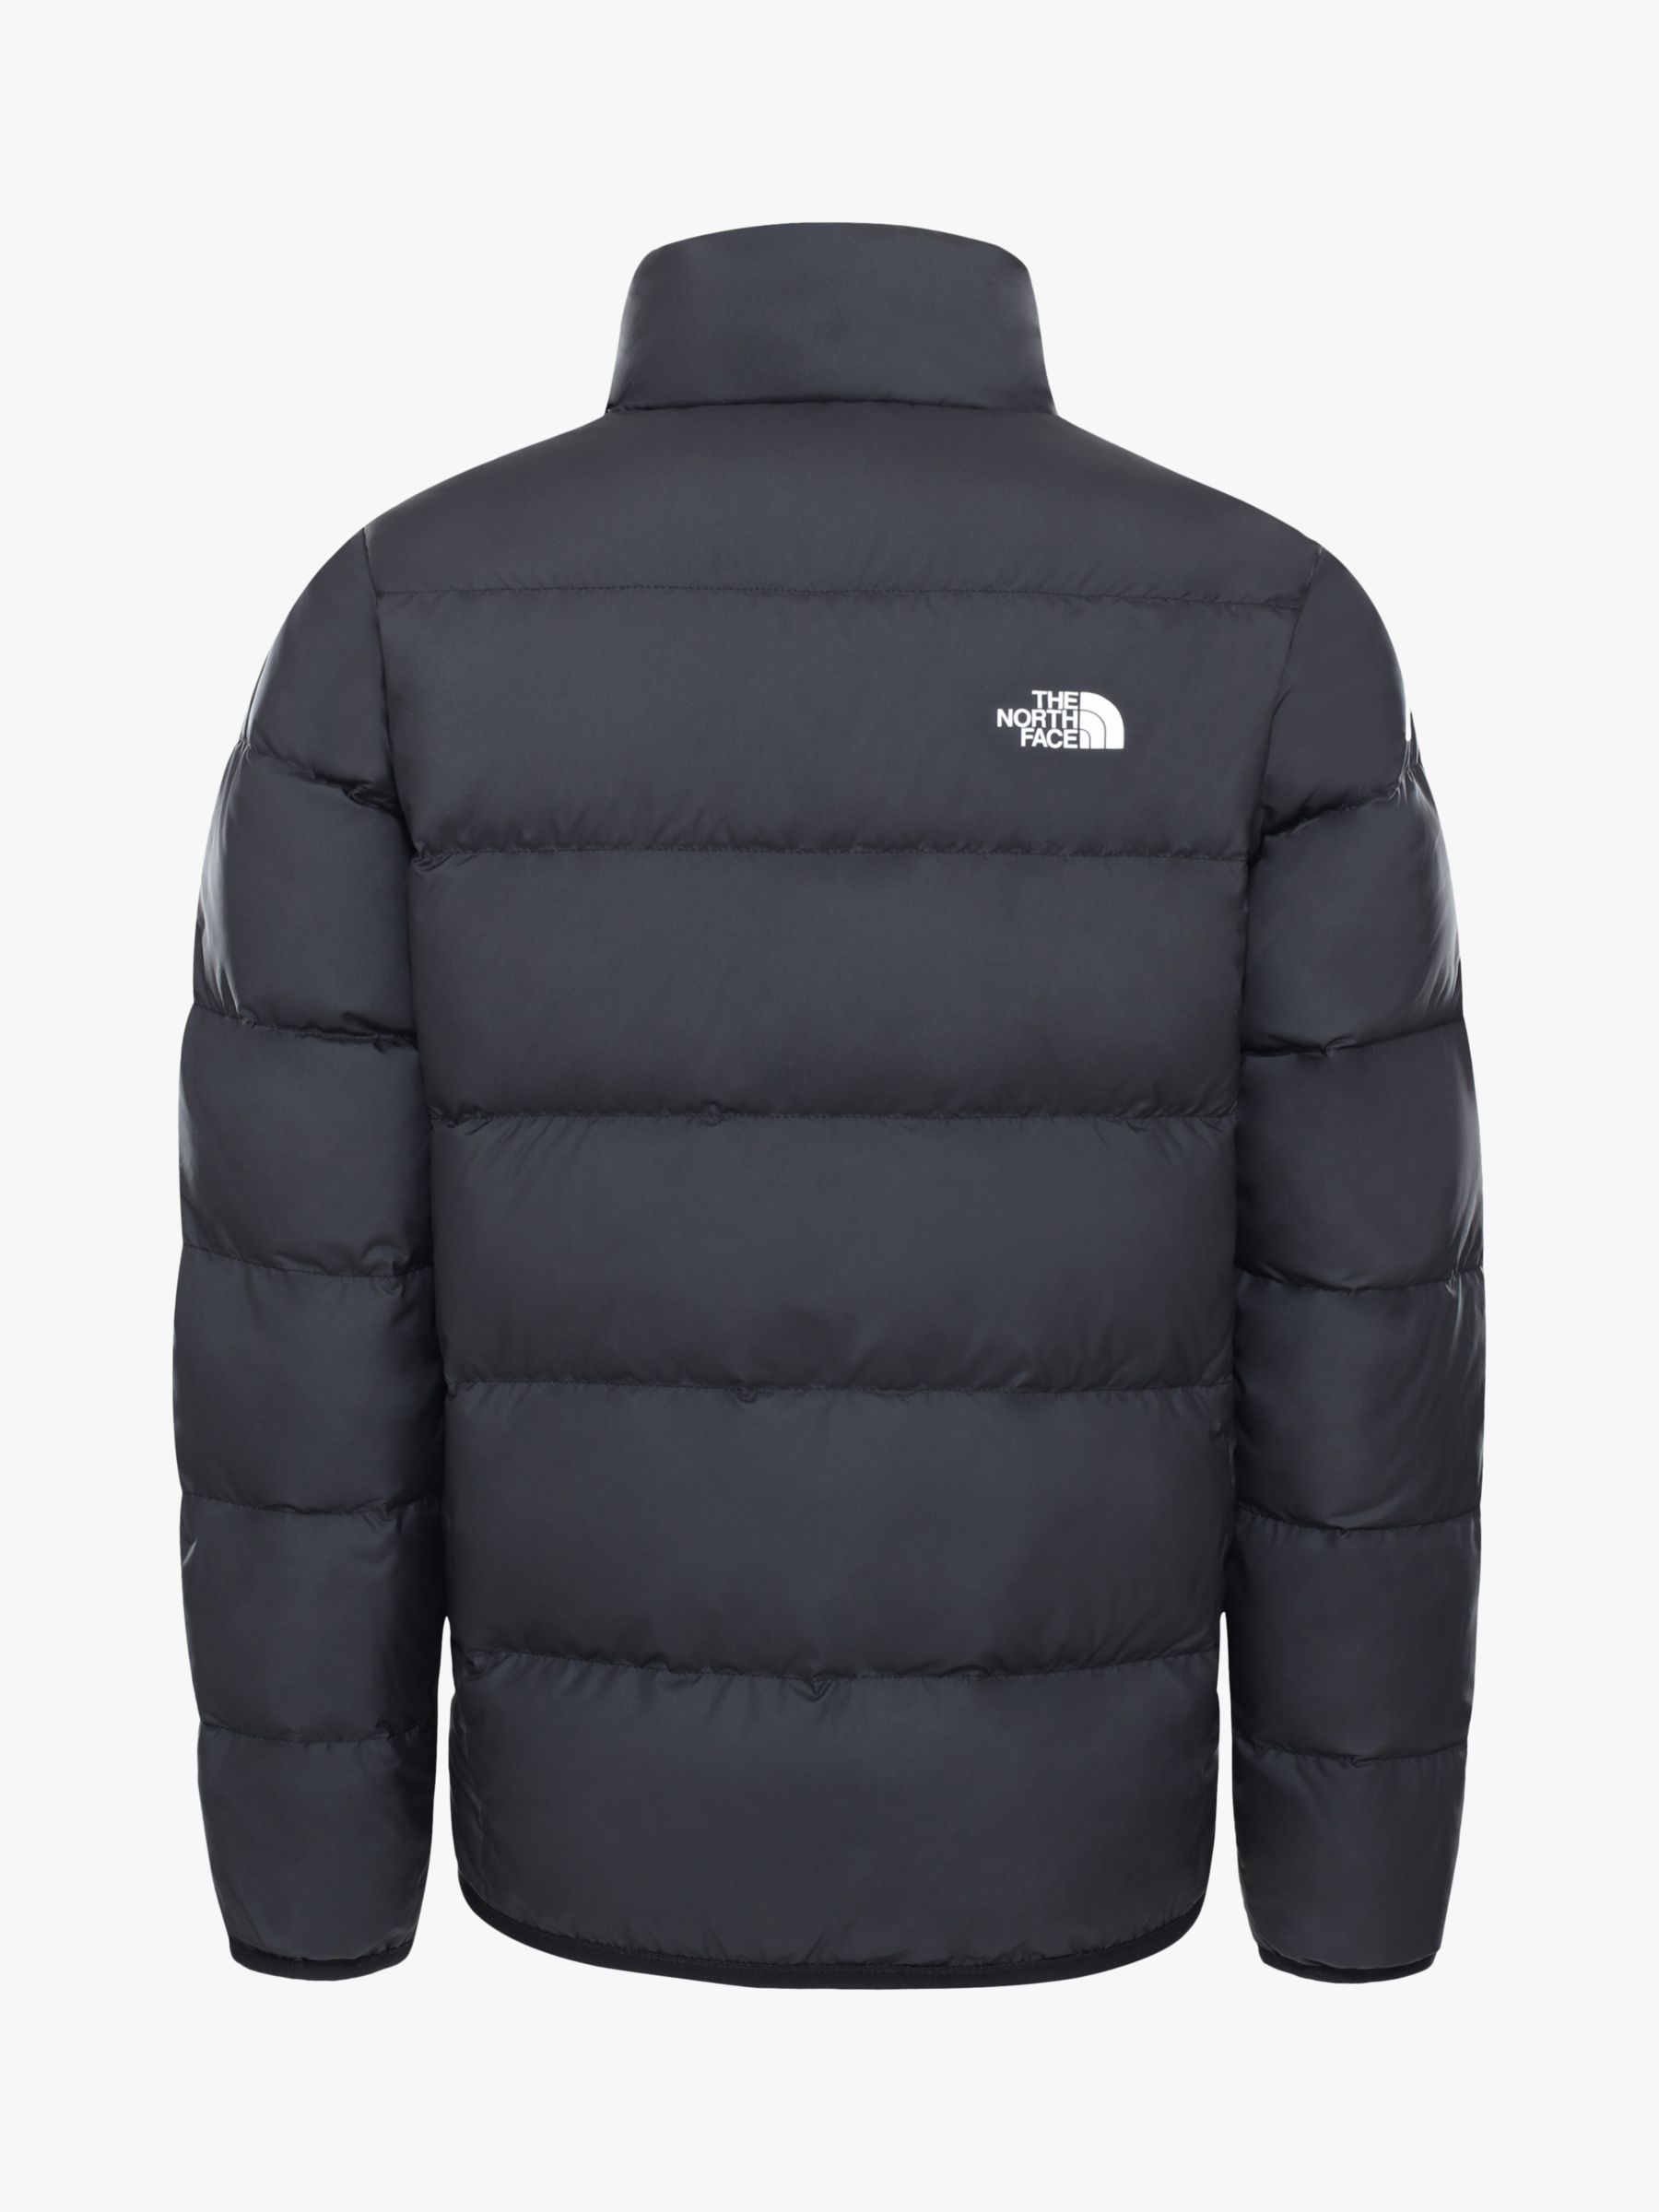 The North Face Boys' Reverse Andes Puffer Jacket, Black at John Lewis ...